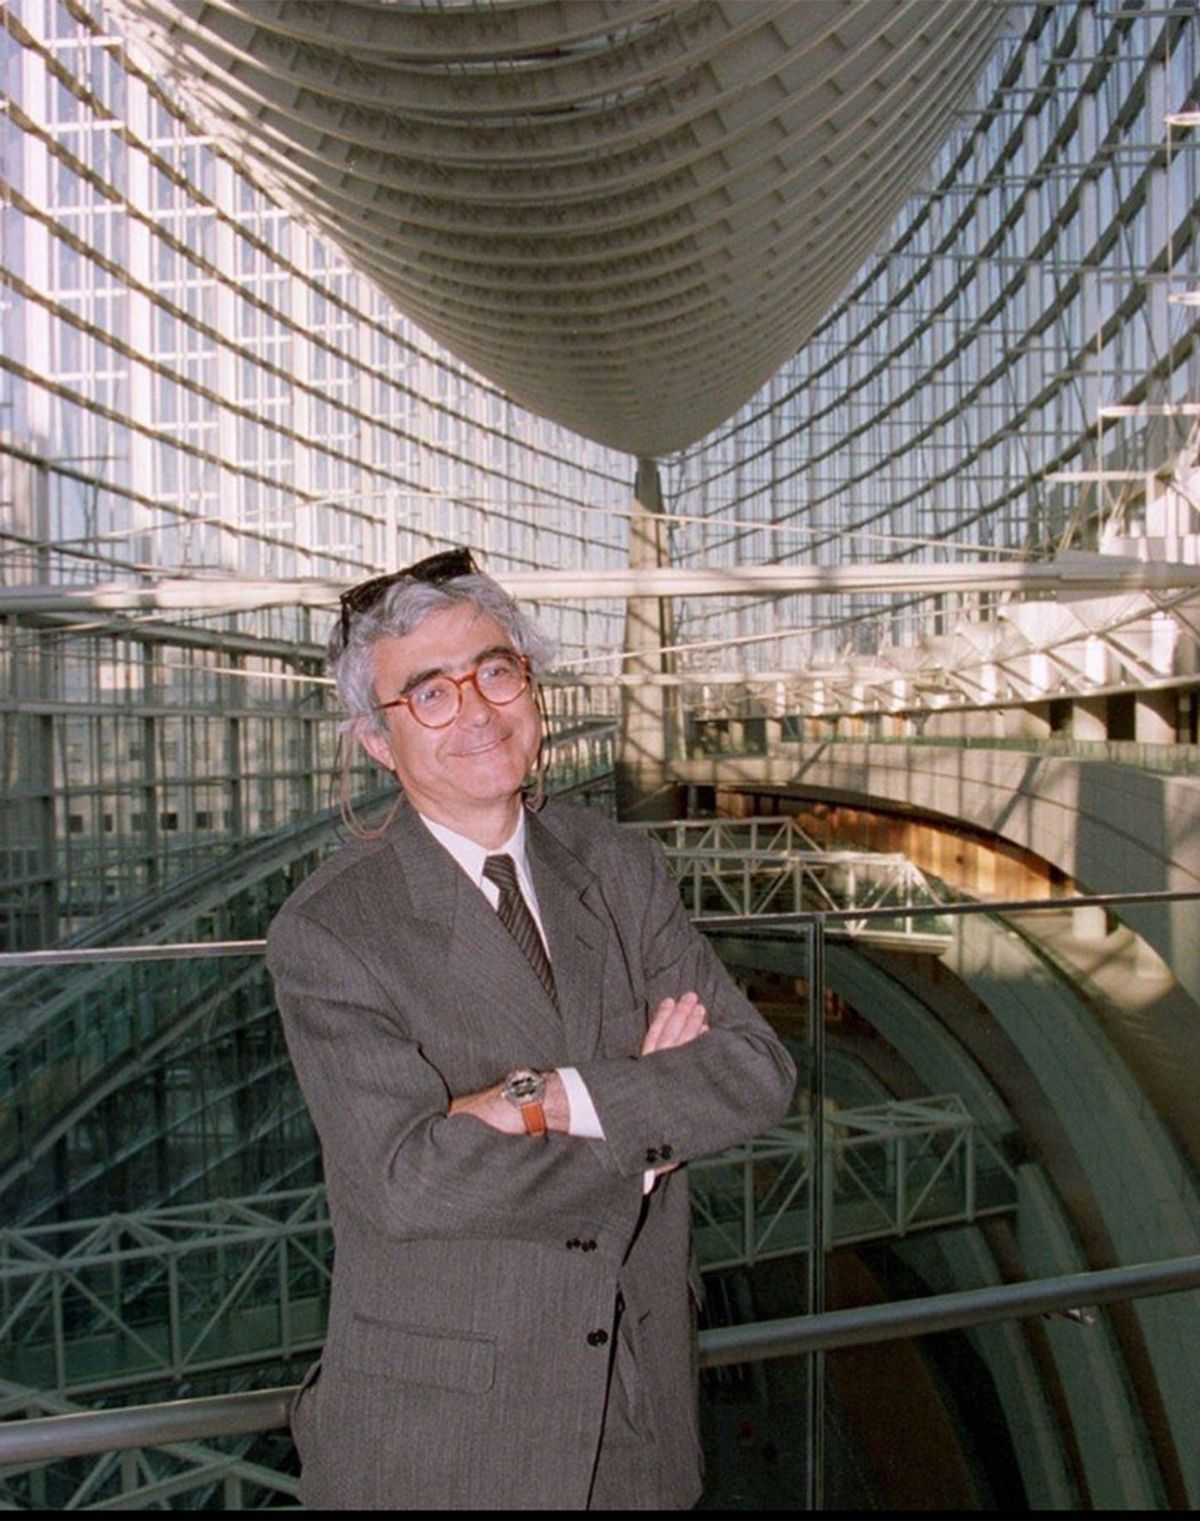 Rafael Viñoly at the Tokyo International Forum (completed 1996), the building that made his international reputation as an architect Rafael Viñoly Architects